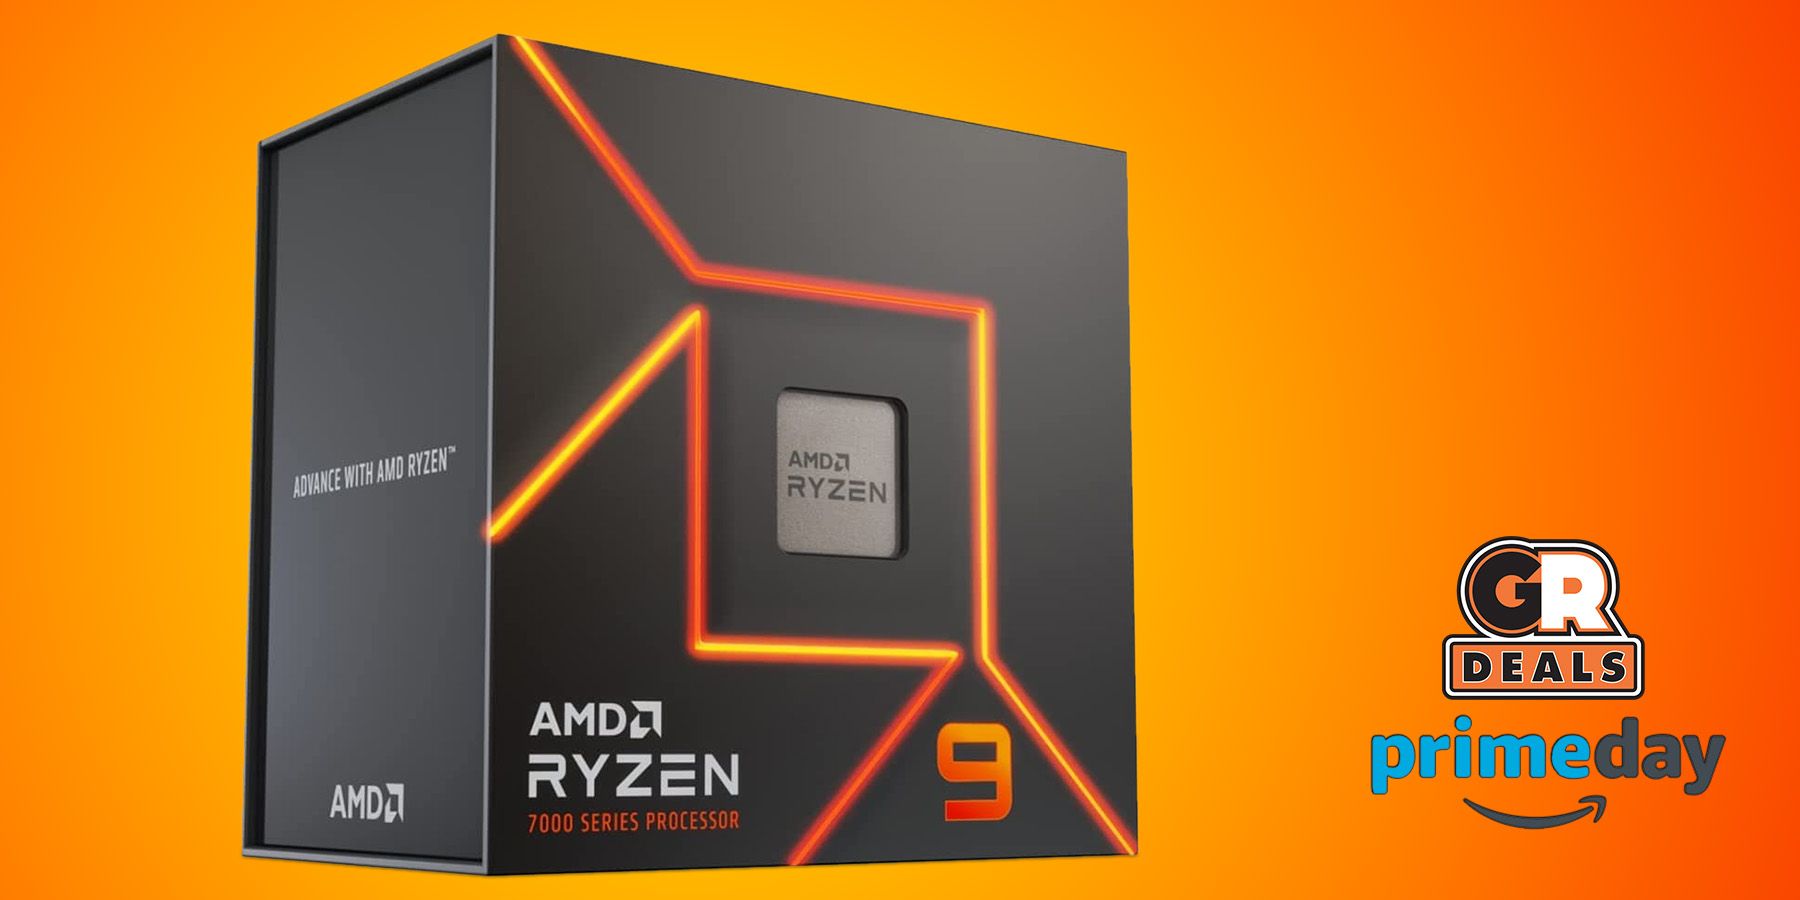 Where to buy the AMD Ryzen 9 7950X3D: Price, release date & more - Dexerto